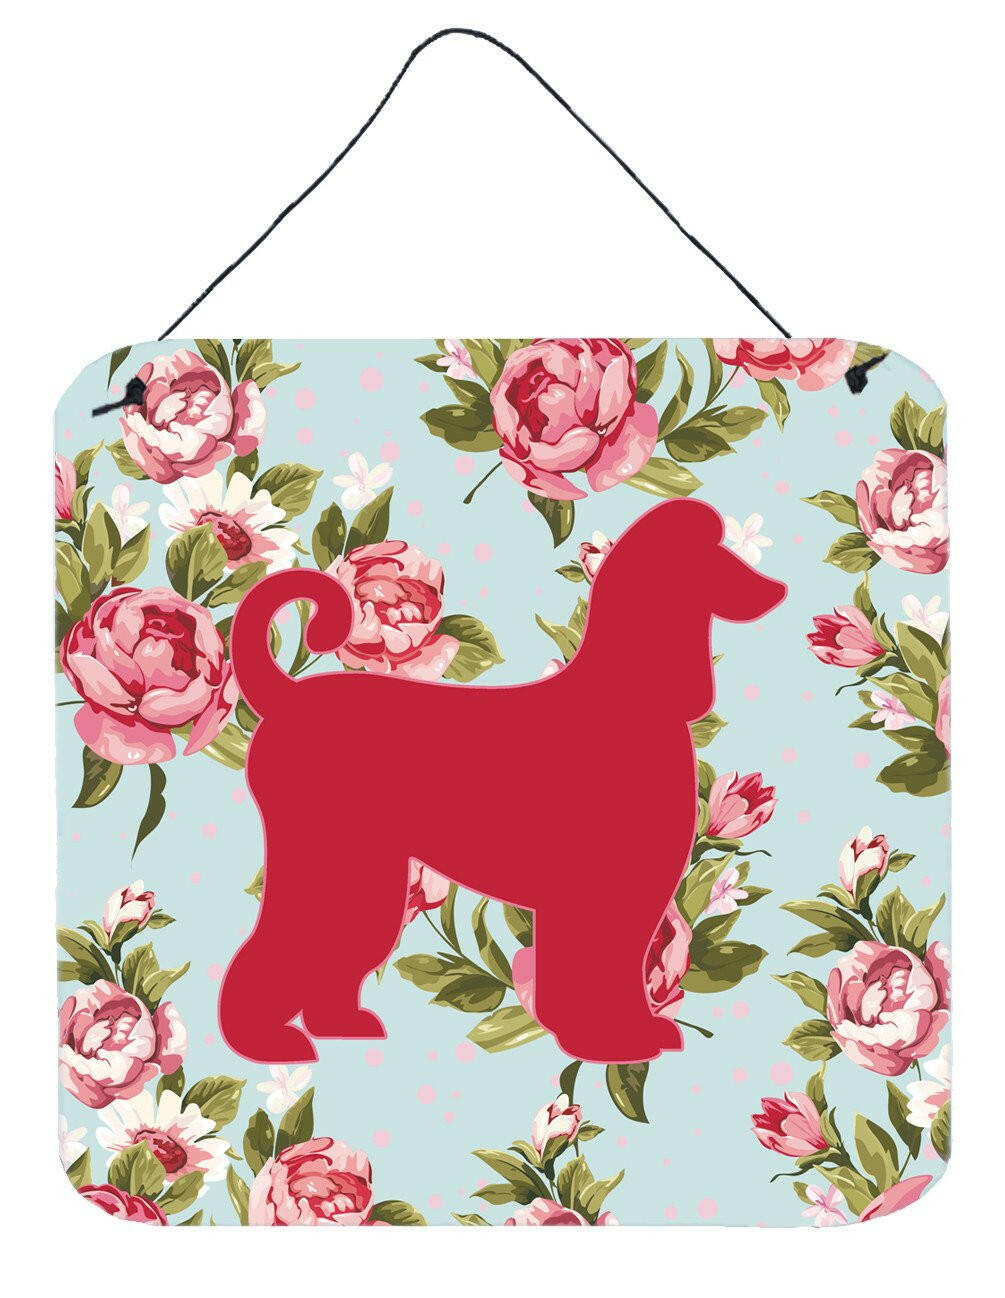 Afghan Hound Shabby Chic Blue Roses Wall or Door Hanging Prints BB1066 by Caroline's Treasures